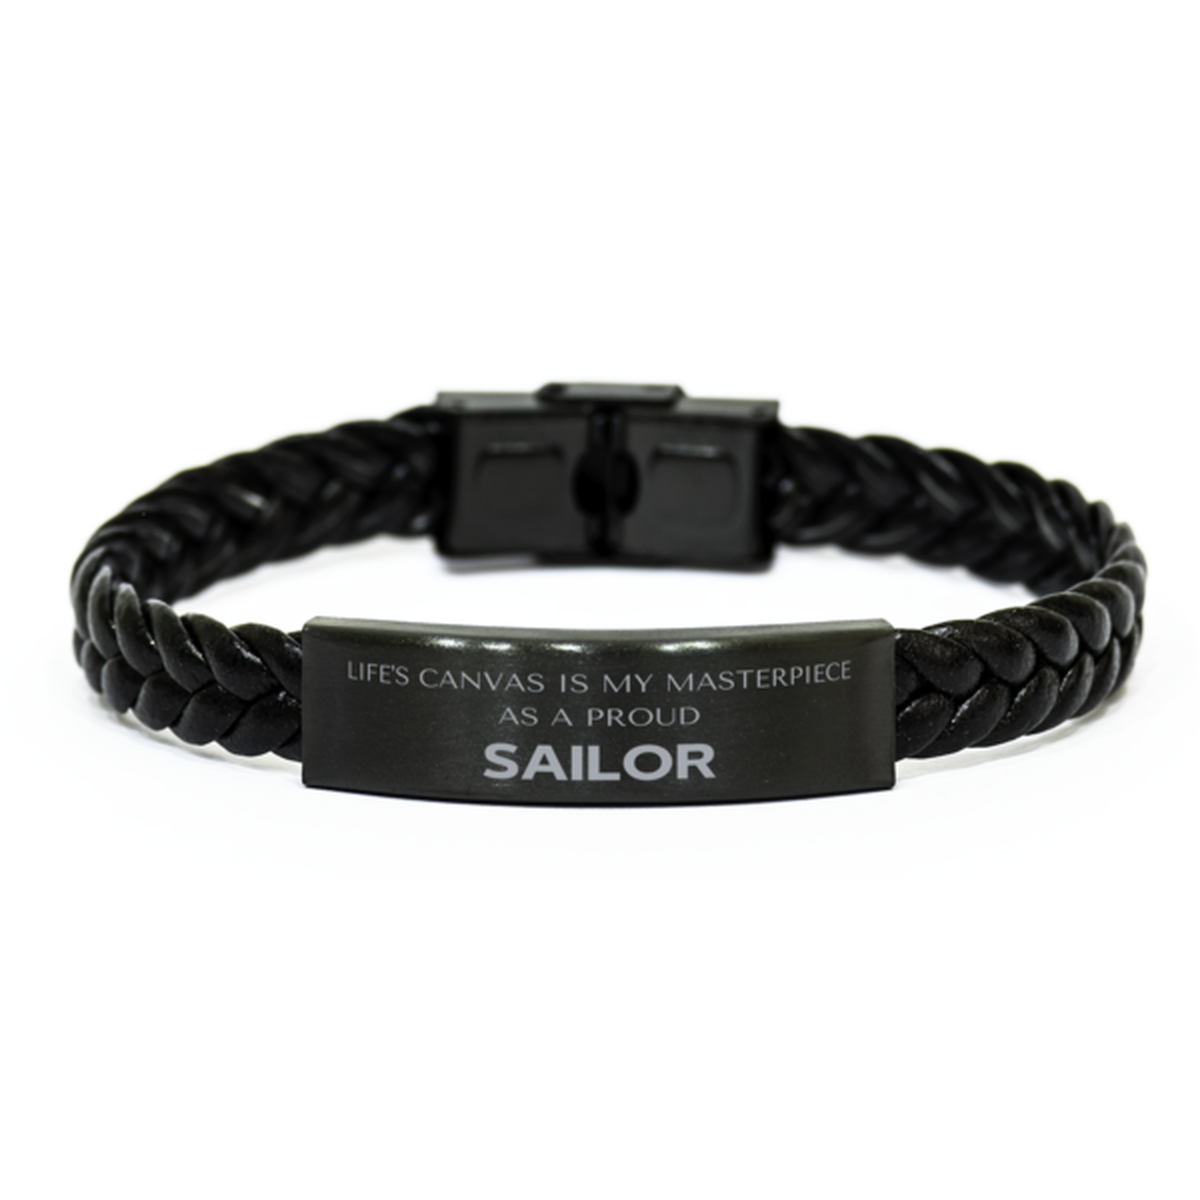 Proud Sailor Gifts, Life's canvas is my masterpiece, Epic Birthday Christmas Unique Braided Leather Bracelet For Sailor, Coworkers, Men, Women, Friends